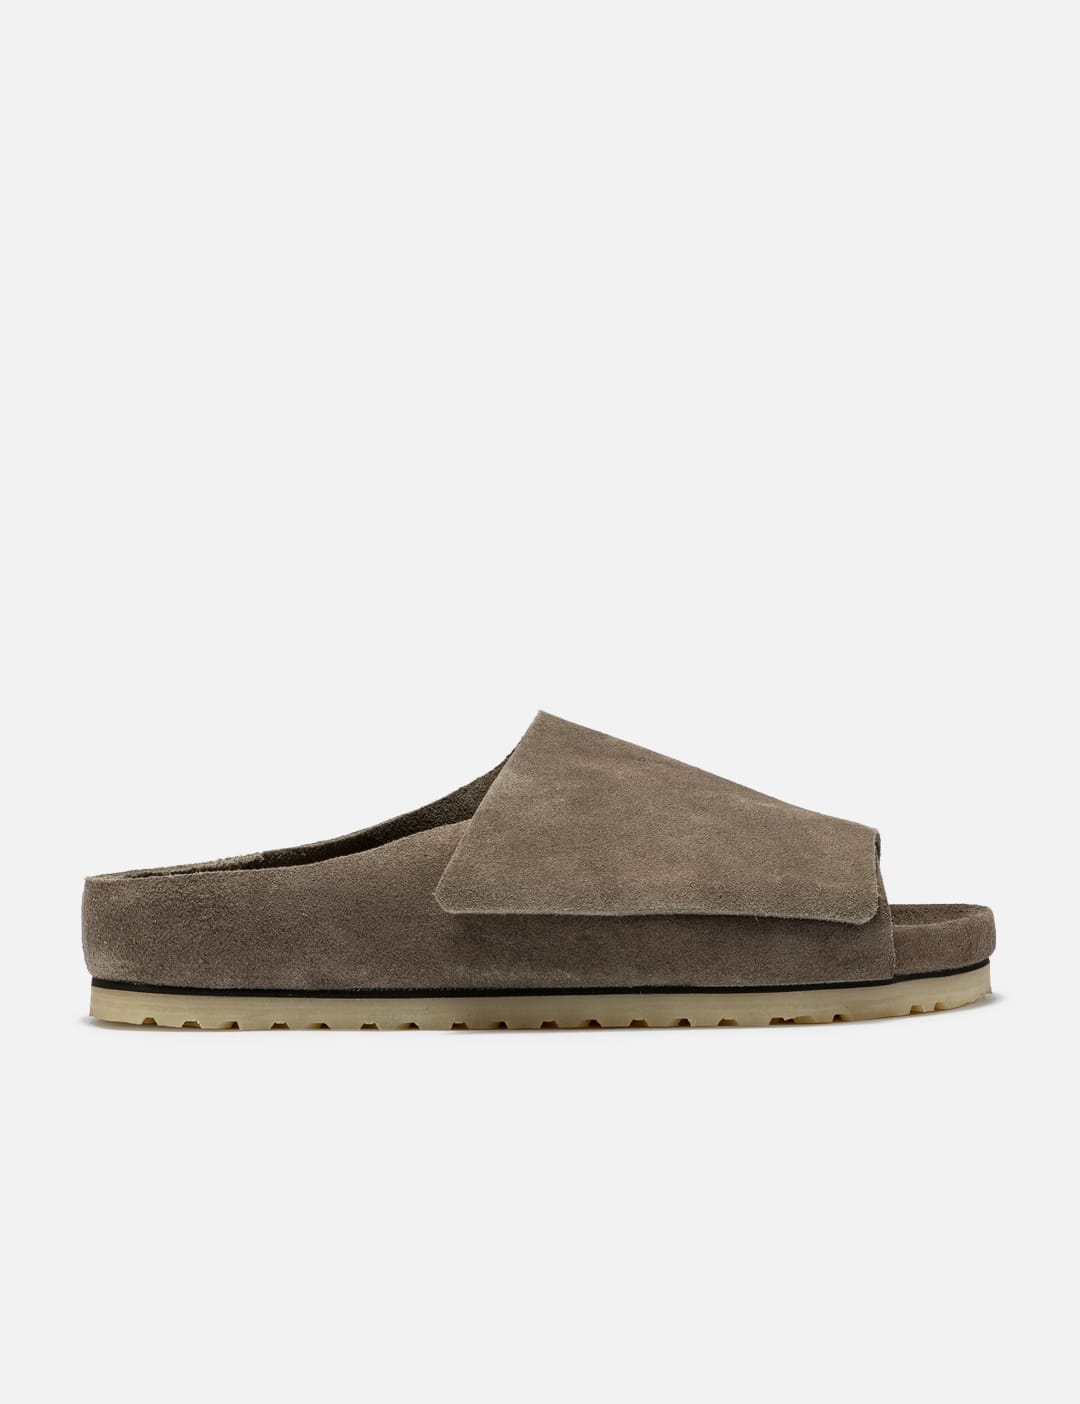 Fear of God - The Loafer | HBX - Globally Curated Fashion and 